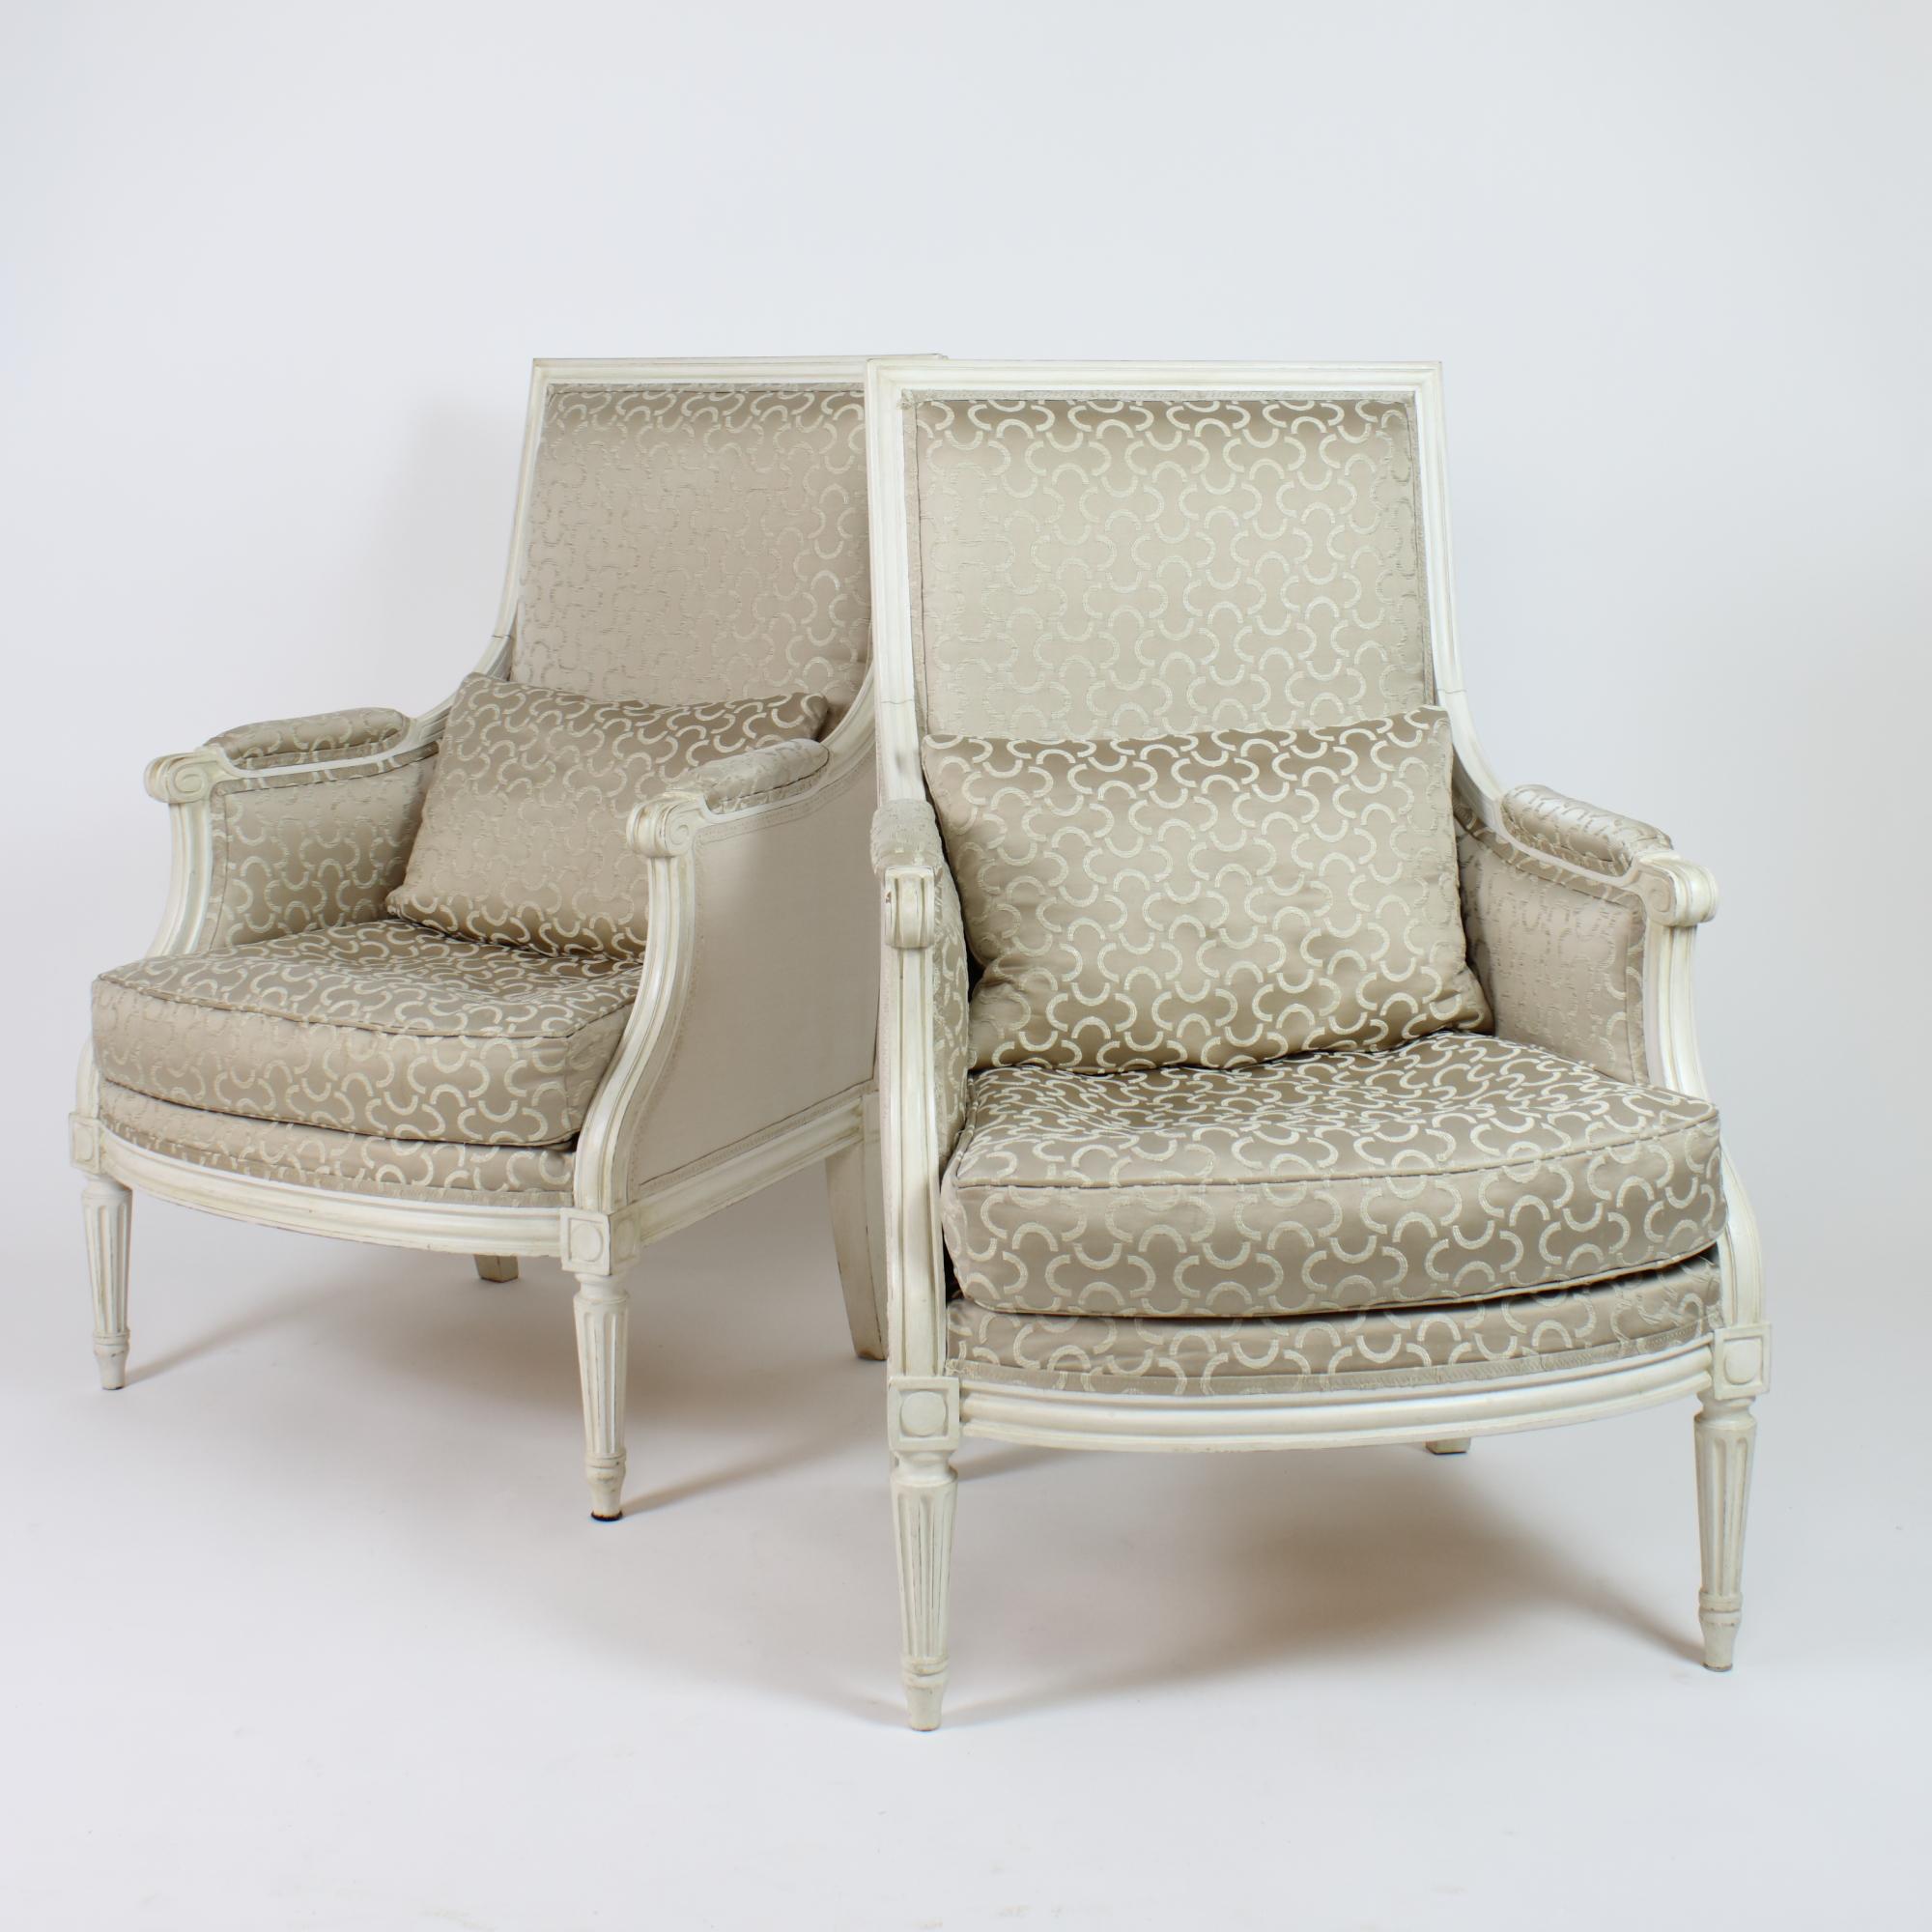 End 19th/Early 20th Century French Painted Wood Louis XVI Armchairs or Bèrgères à la Reine 

A fine pair of late 19th/early 20th century paintwood armchairs, so-called 